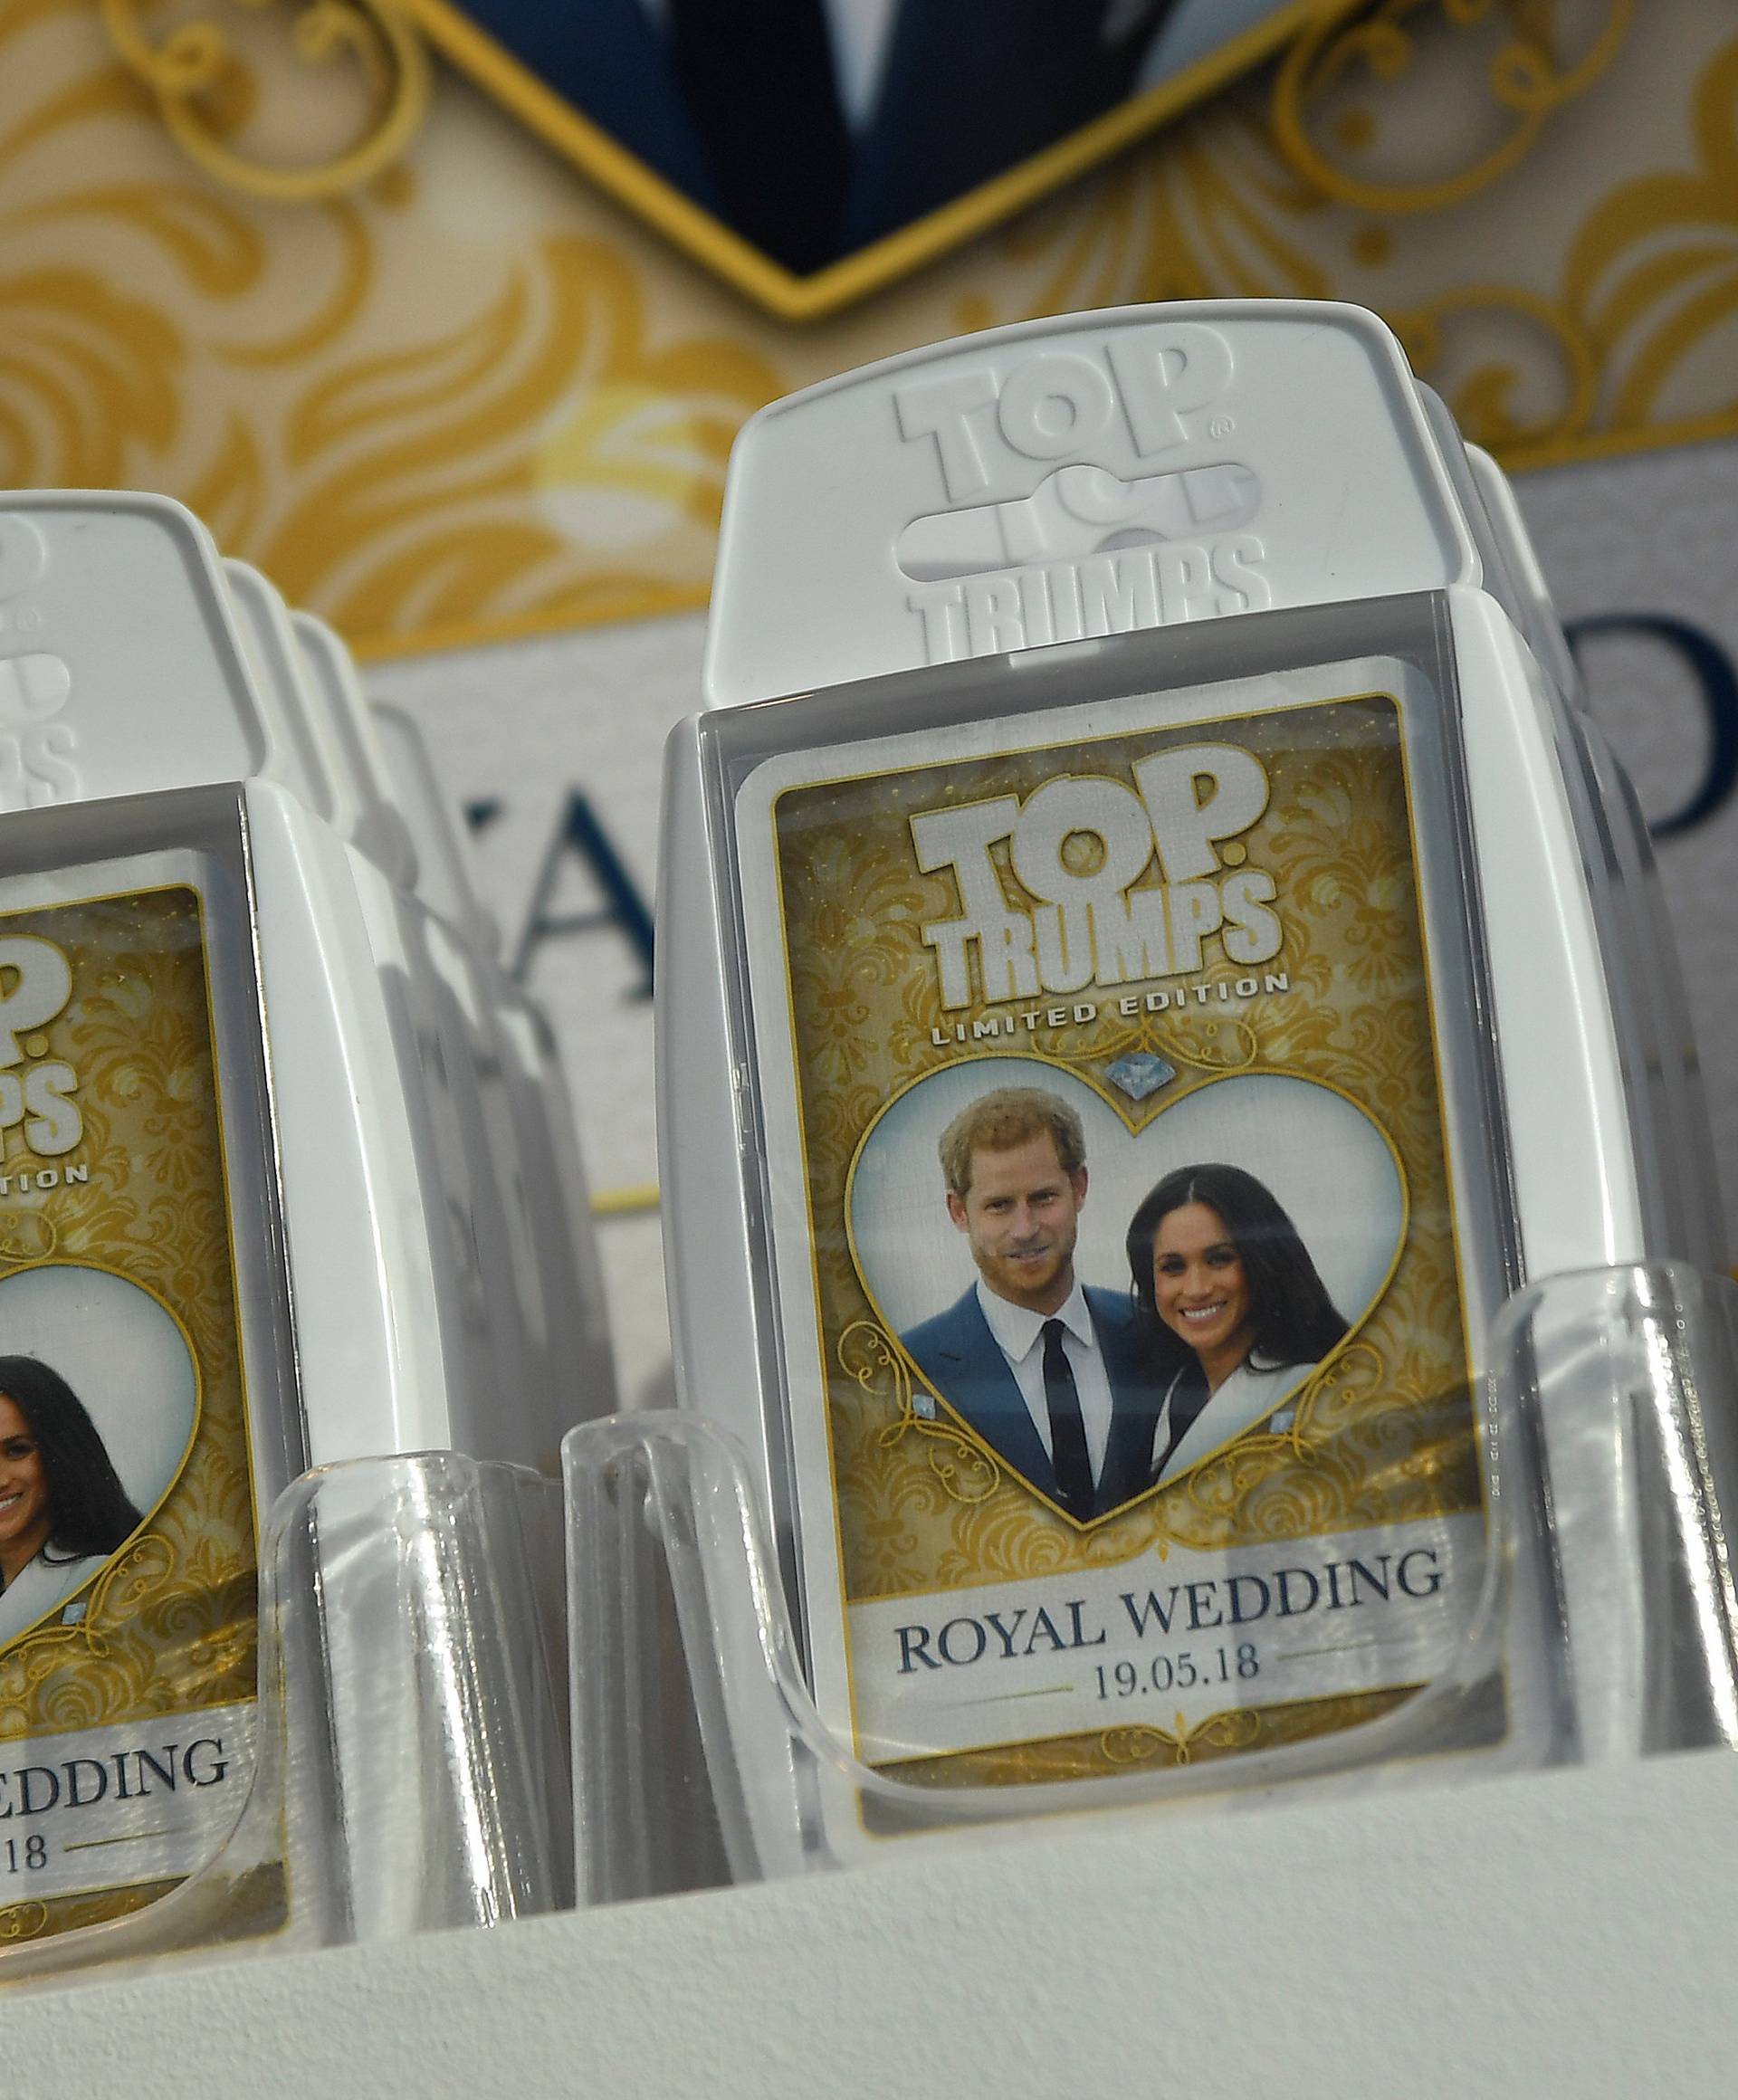 A card game themed on the forthcoming wedding of Britain's Prince Harry and his fiancee Meghan Markle is seen for sale in a shop in Windsor, Britain